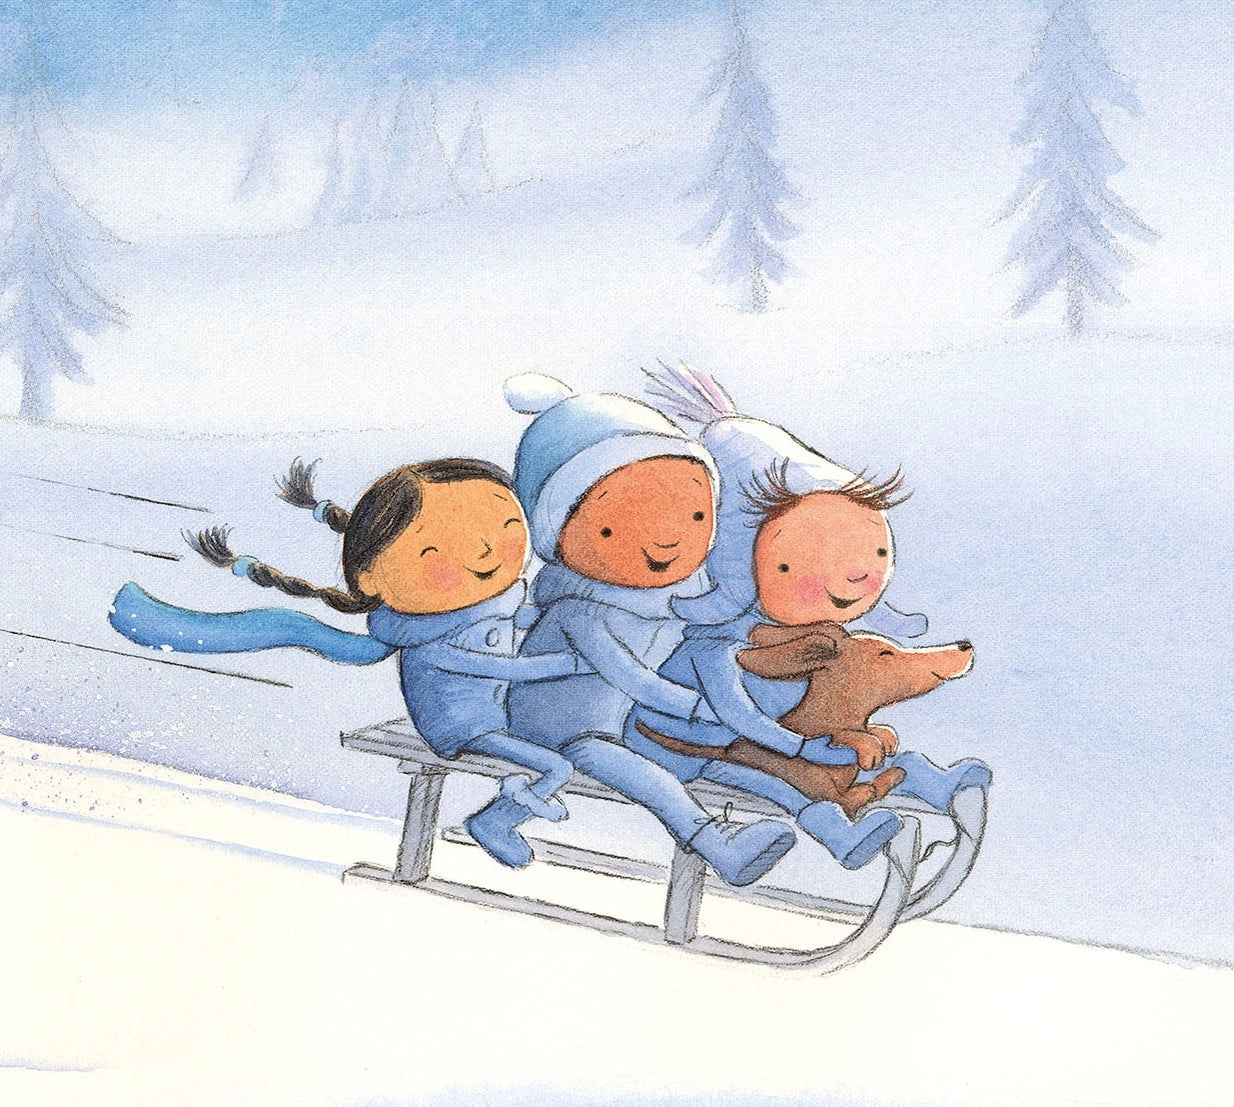 We Want Snow!: A Wintry Chant Picture Book